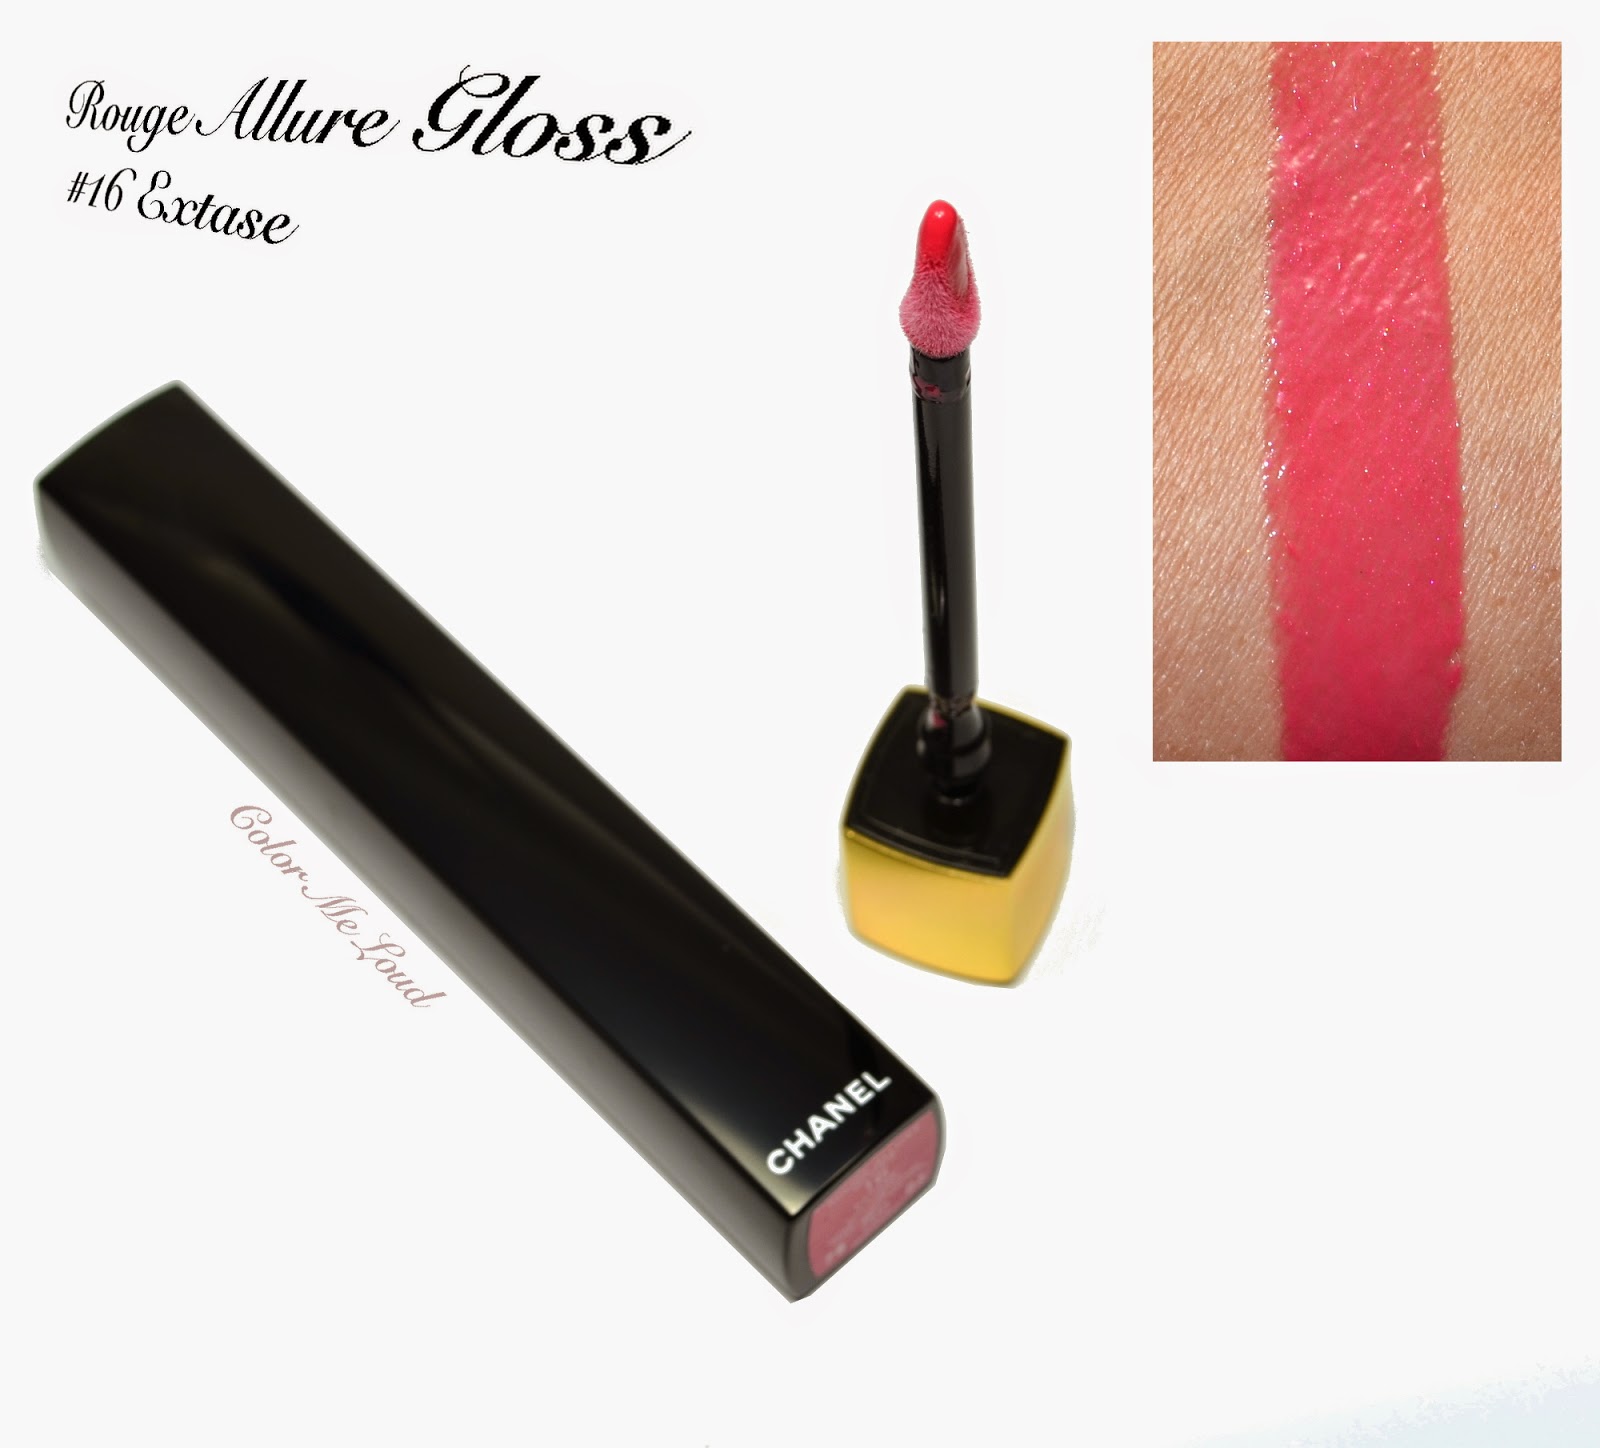 Chanel Rouge Allure Gloss One Click Collection Swatches, All Glosses, Nail  Polishes #635 Expression, #639 Exception and new Rouge Allure Lipstick  Shades, Review & FOTD